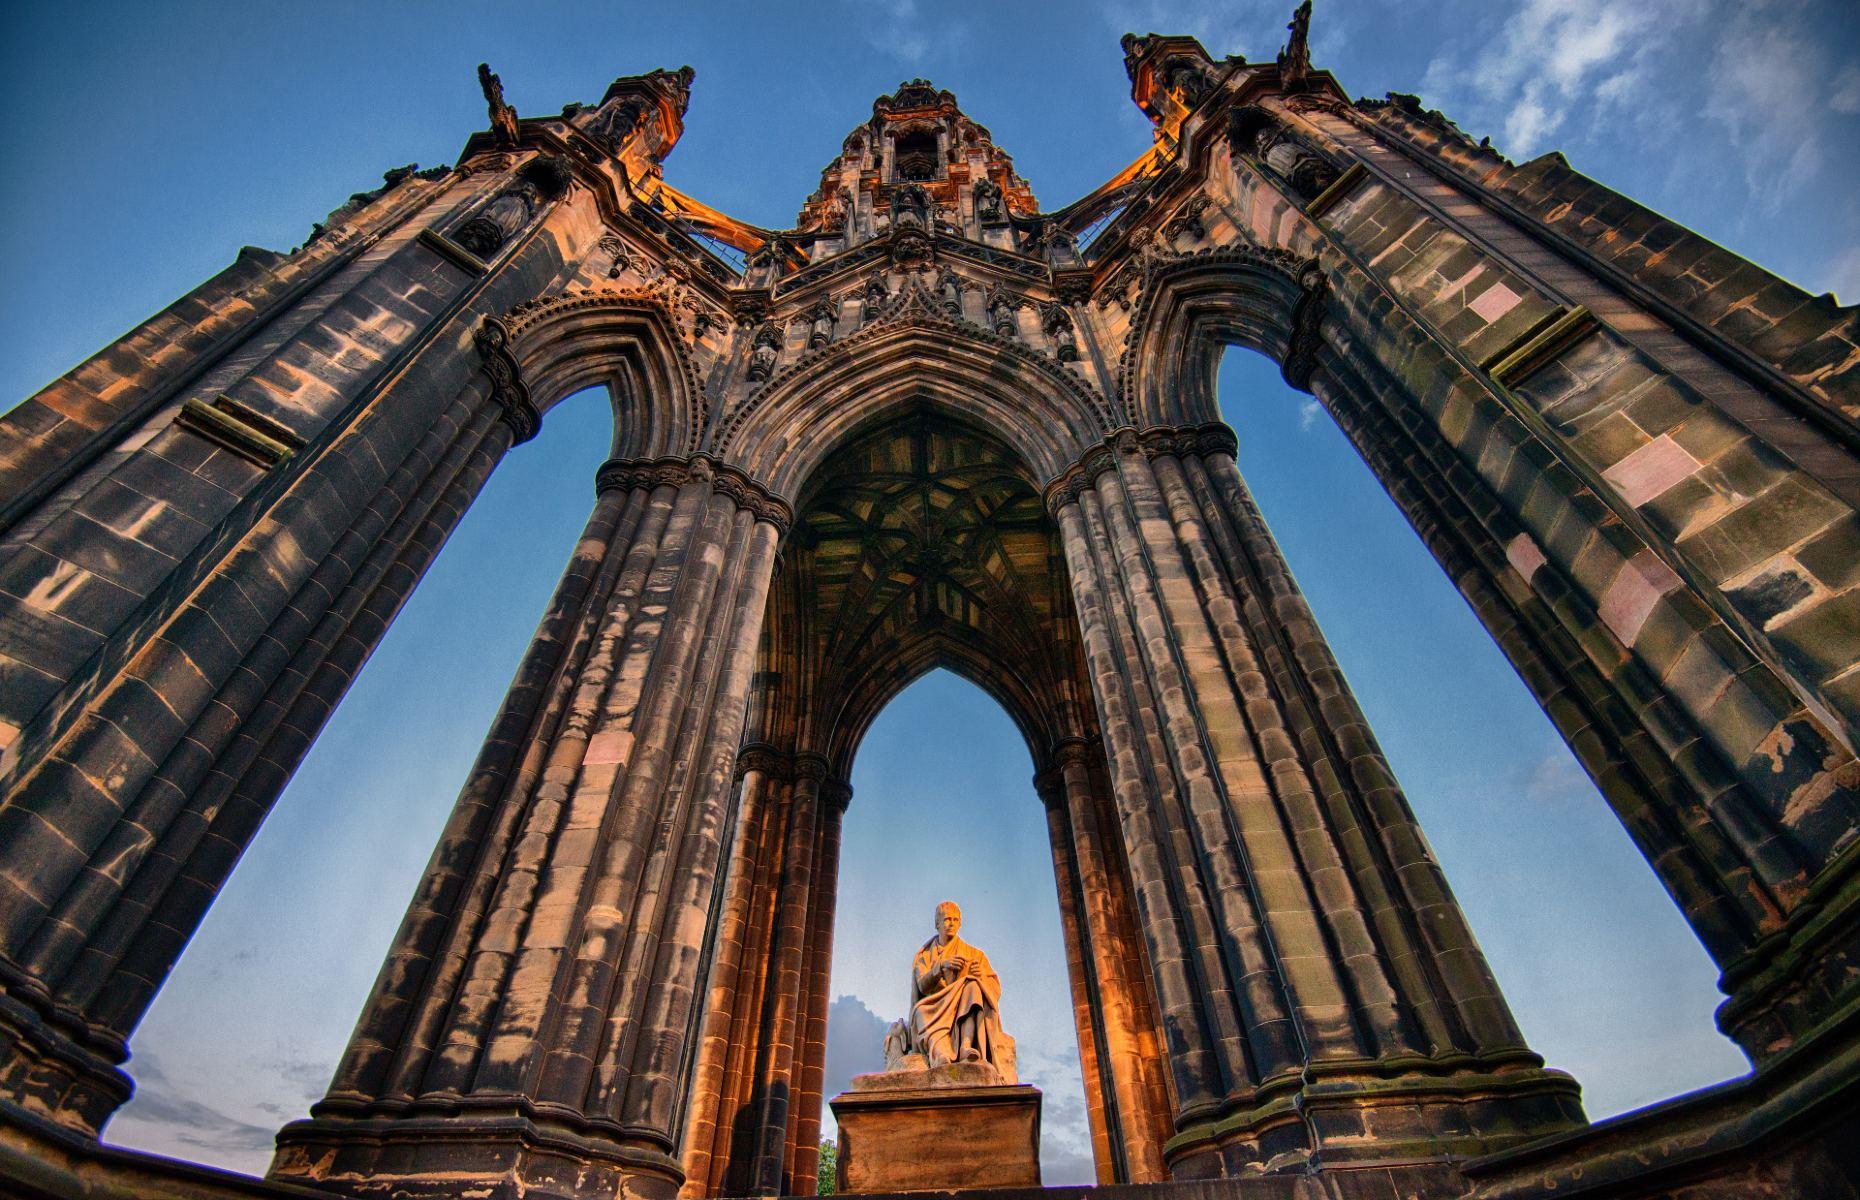 <p>Erected in honour of the Scottish author Sir Walter Scott, this Victorian Gothic monument is one of Edinburgh’s most impressive landmarks. Standing tall in Princes Street Gardens, <a href="https://www.edinburghmuseums.org.uk/venue/scott-monument">Scott Monument</a> has narrow steps leading visitors to several viewing platforms, which provide sweeping panoramas across the city. A marble statue of the writer and his dog Maida proudly sits at the base.</p>